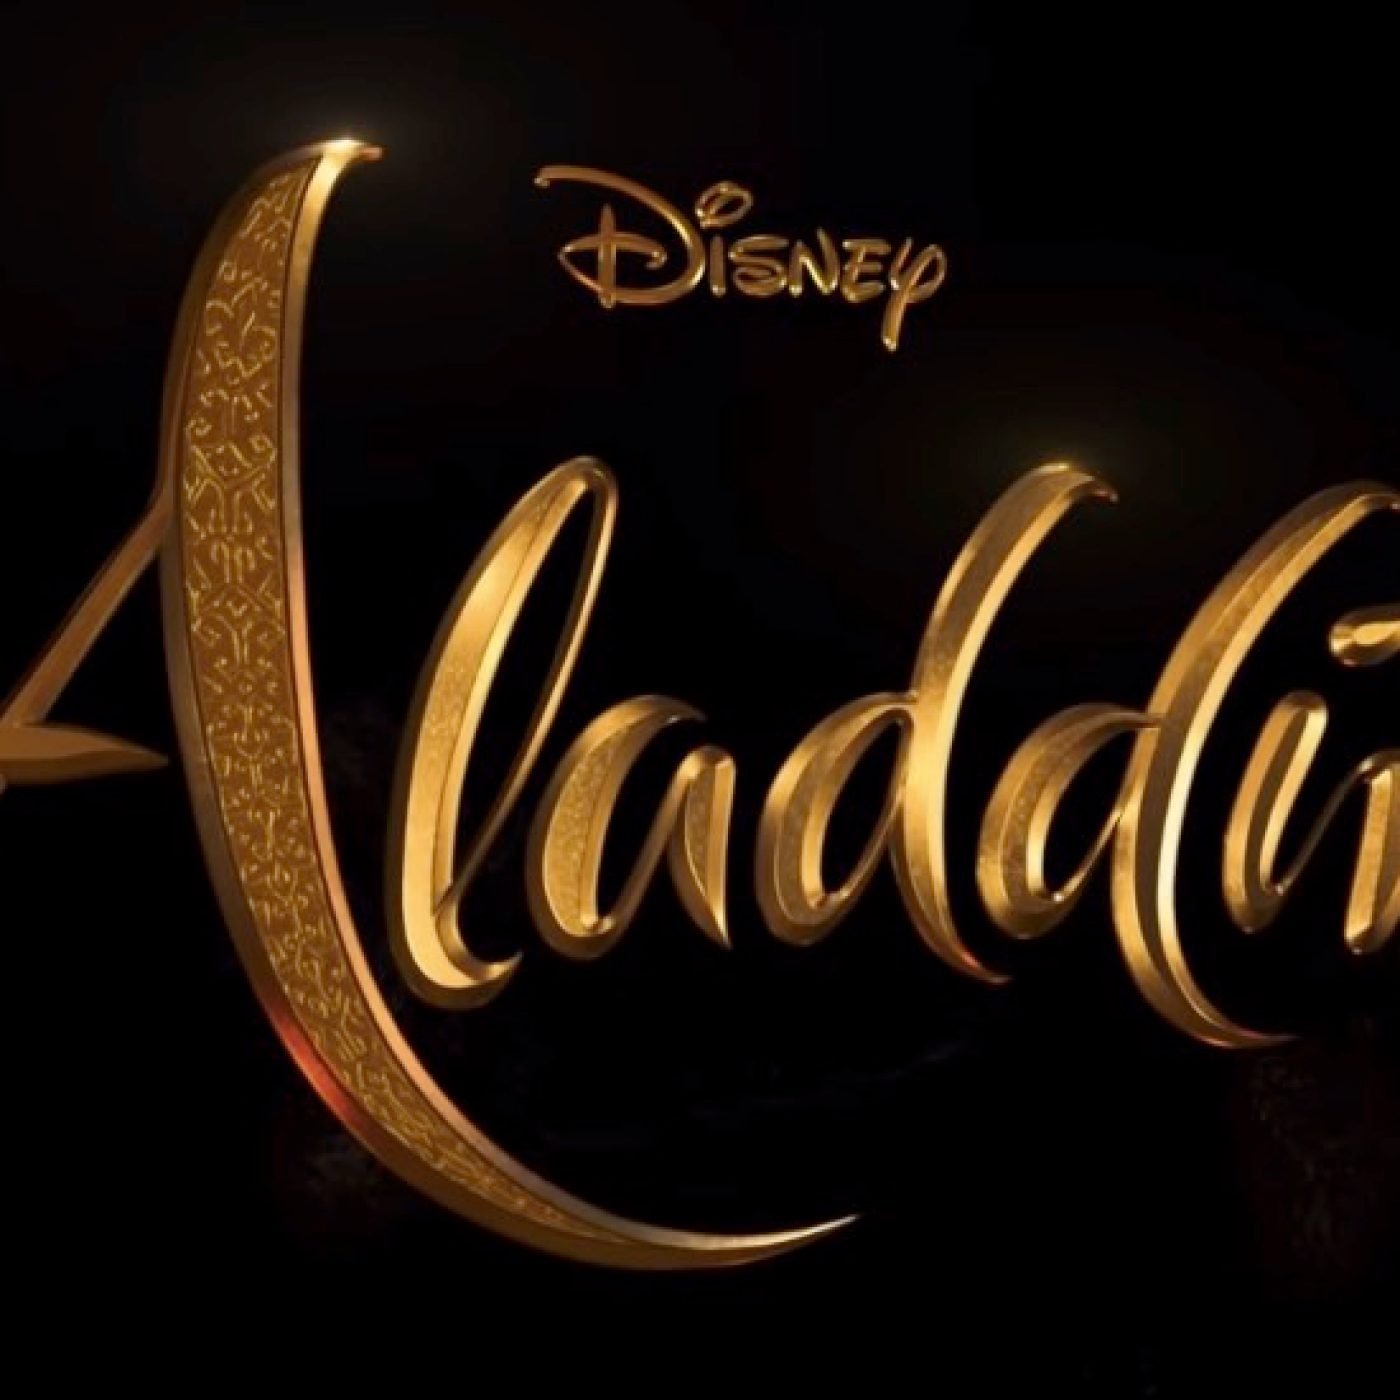 Disney's Aladdin Remake: First Look at Will Smith as Genie